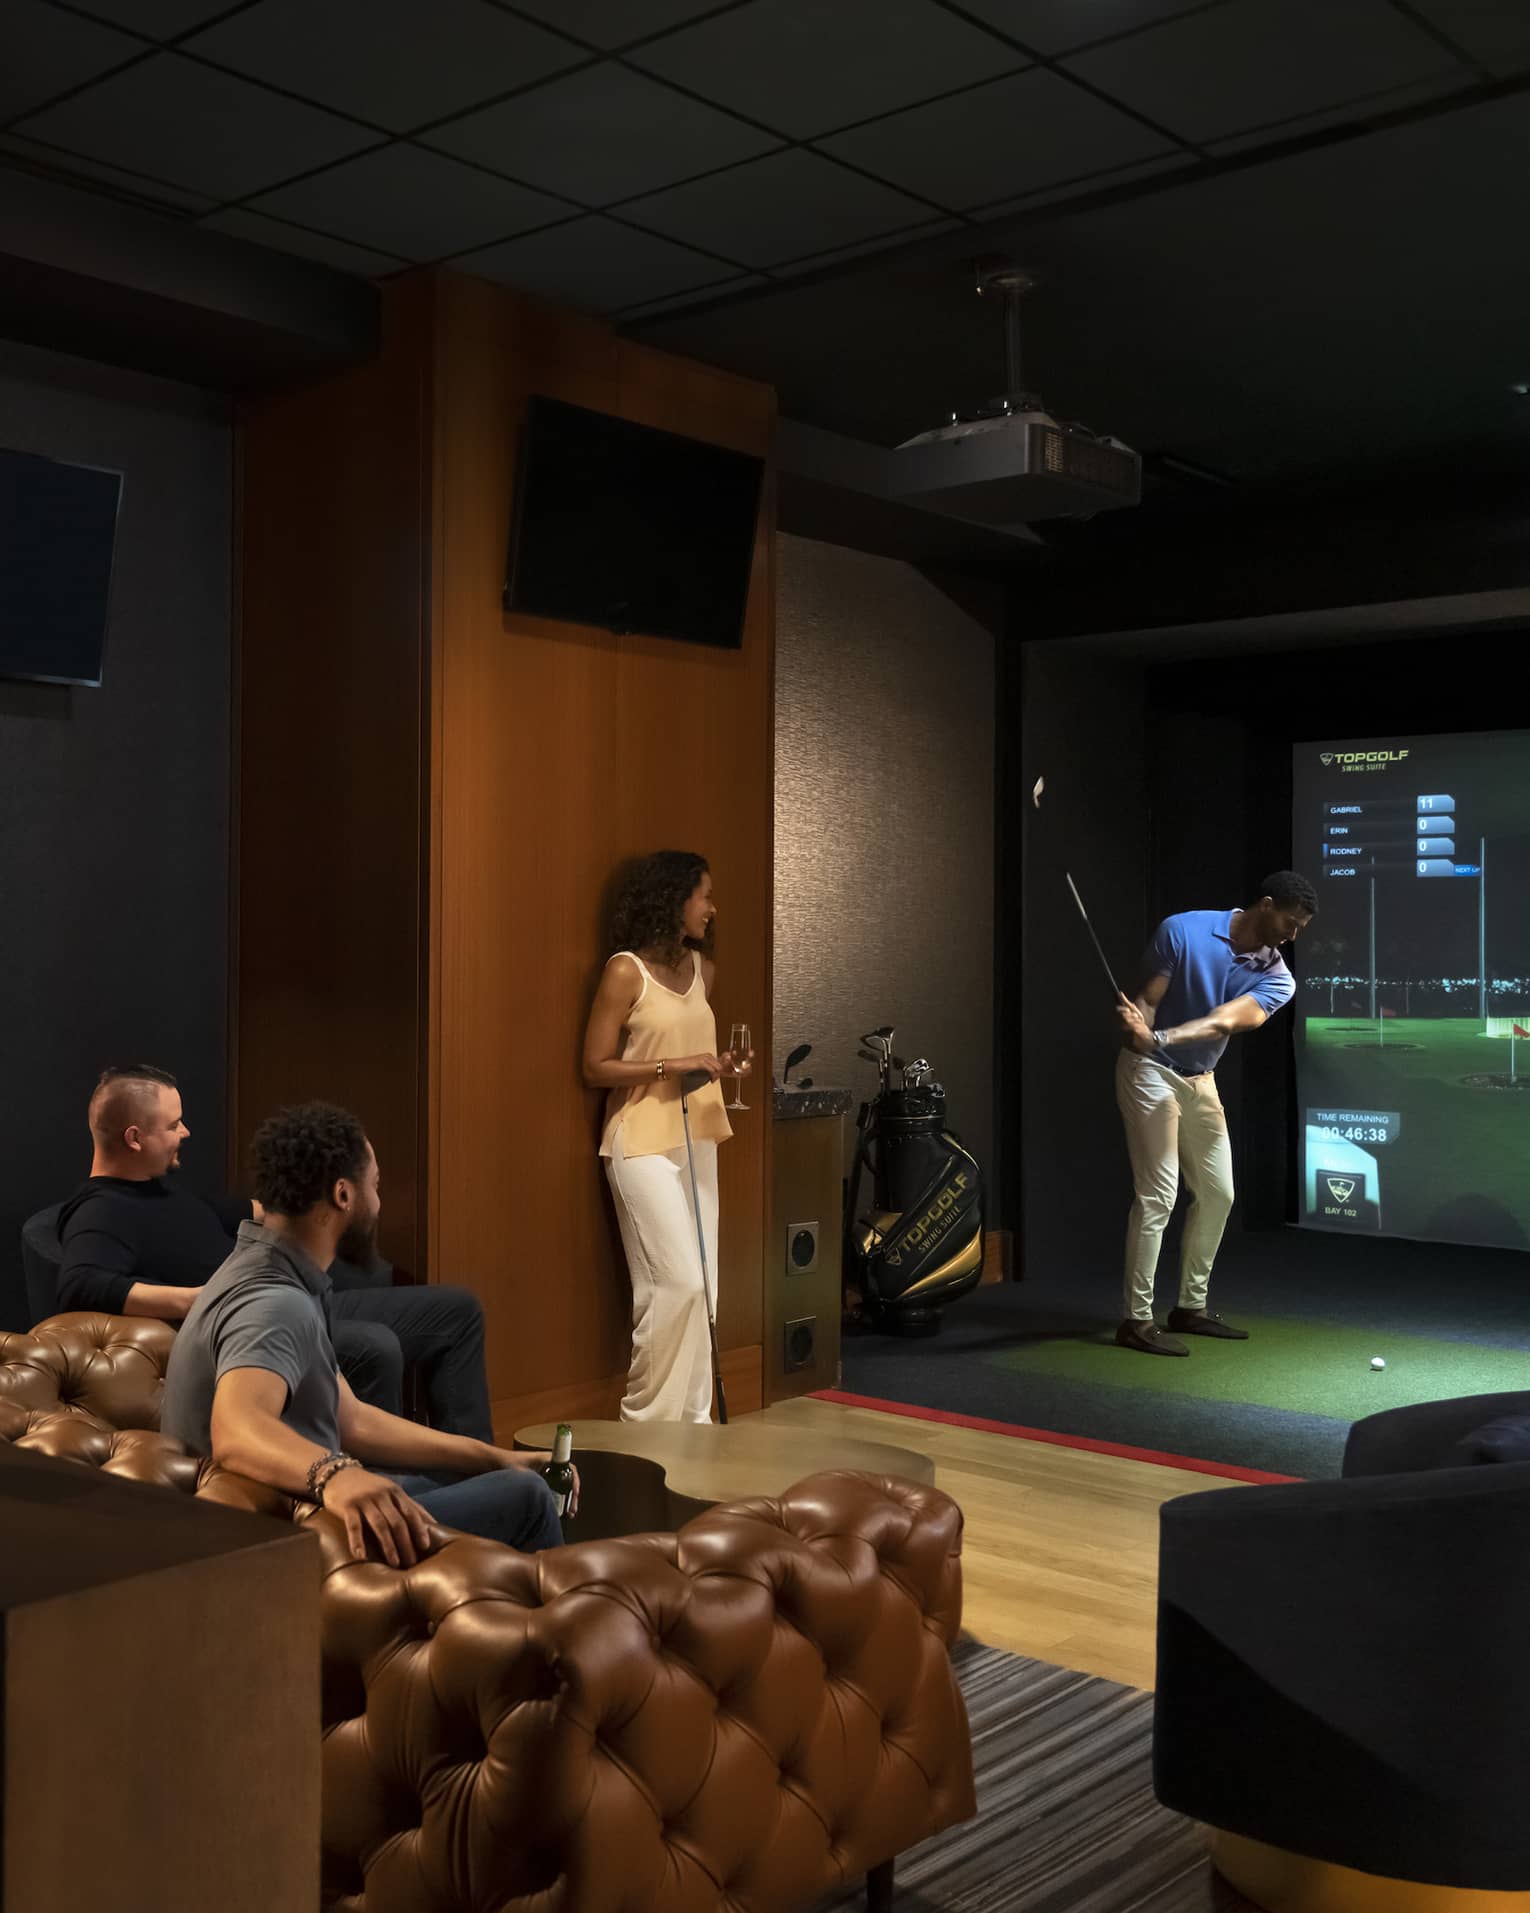 A group of people watching and playing a virtual golf game.